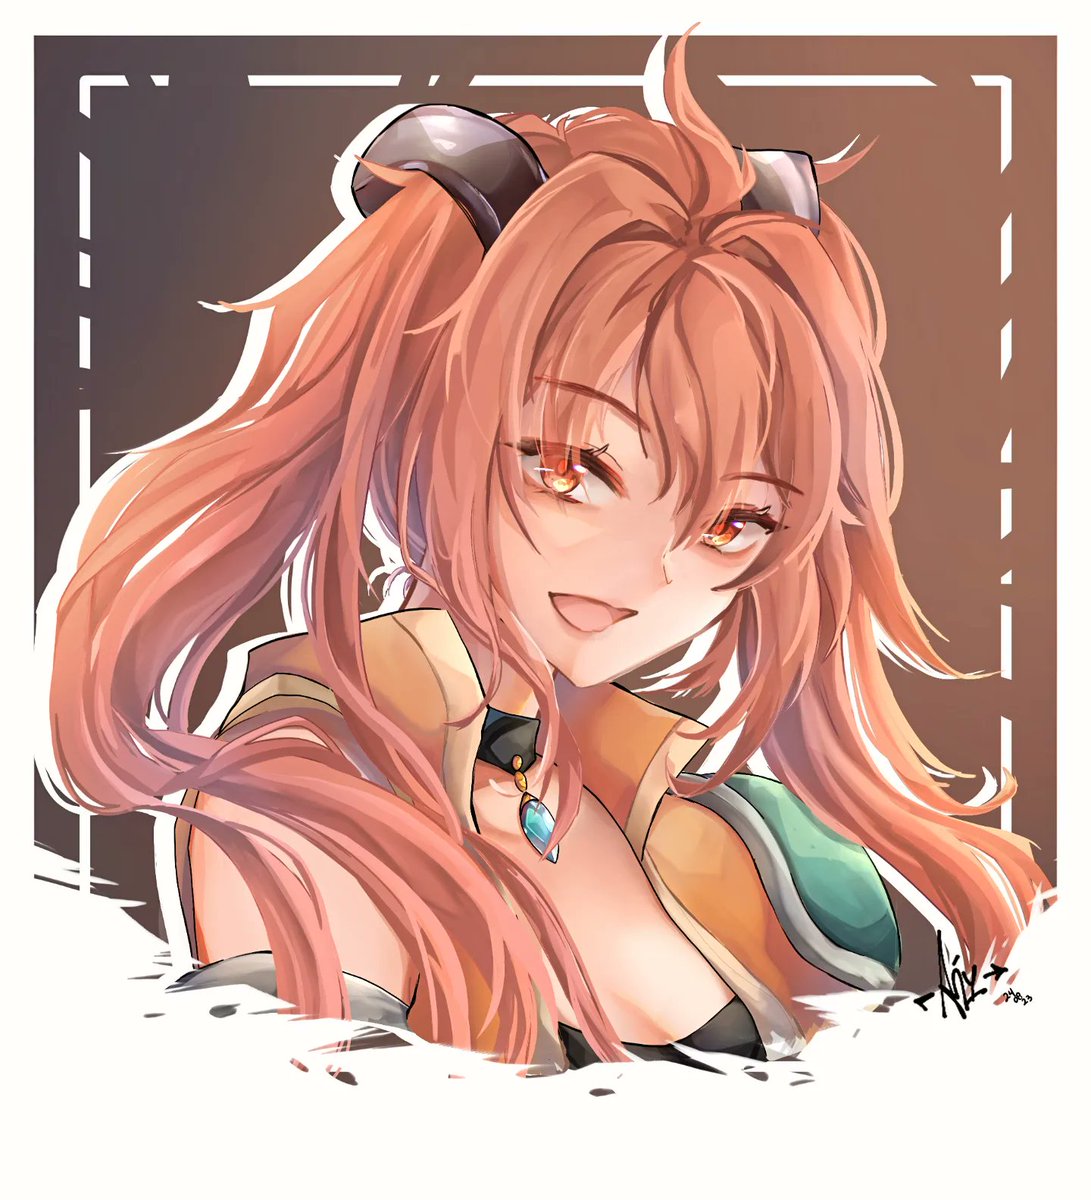 August 2023 fanart, estelle bright from trails in the sky May my future be as bright as her name and smiley 🙏 amen #fanart #illustshare #estellebright #空の軌跡 #soranokisekiSC #falcom